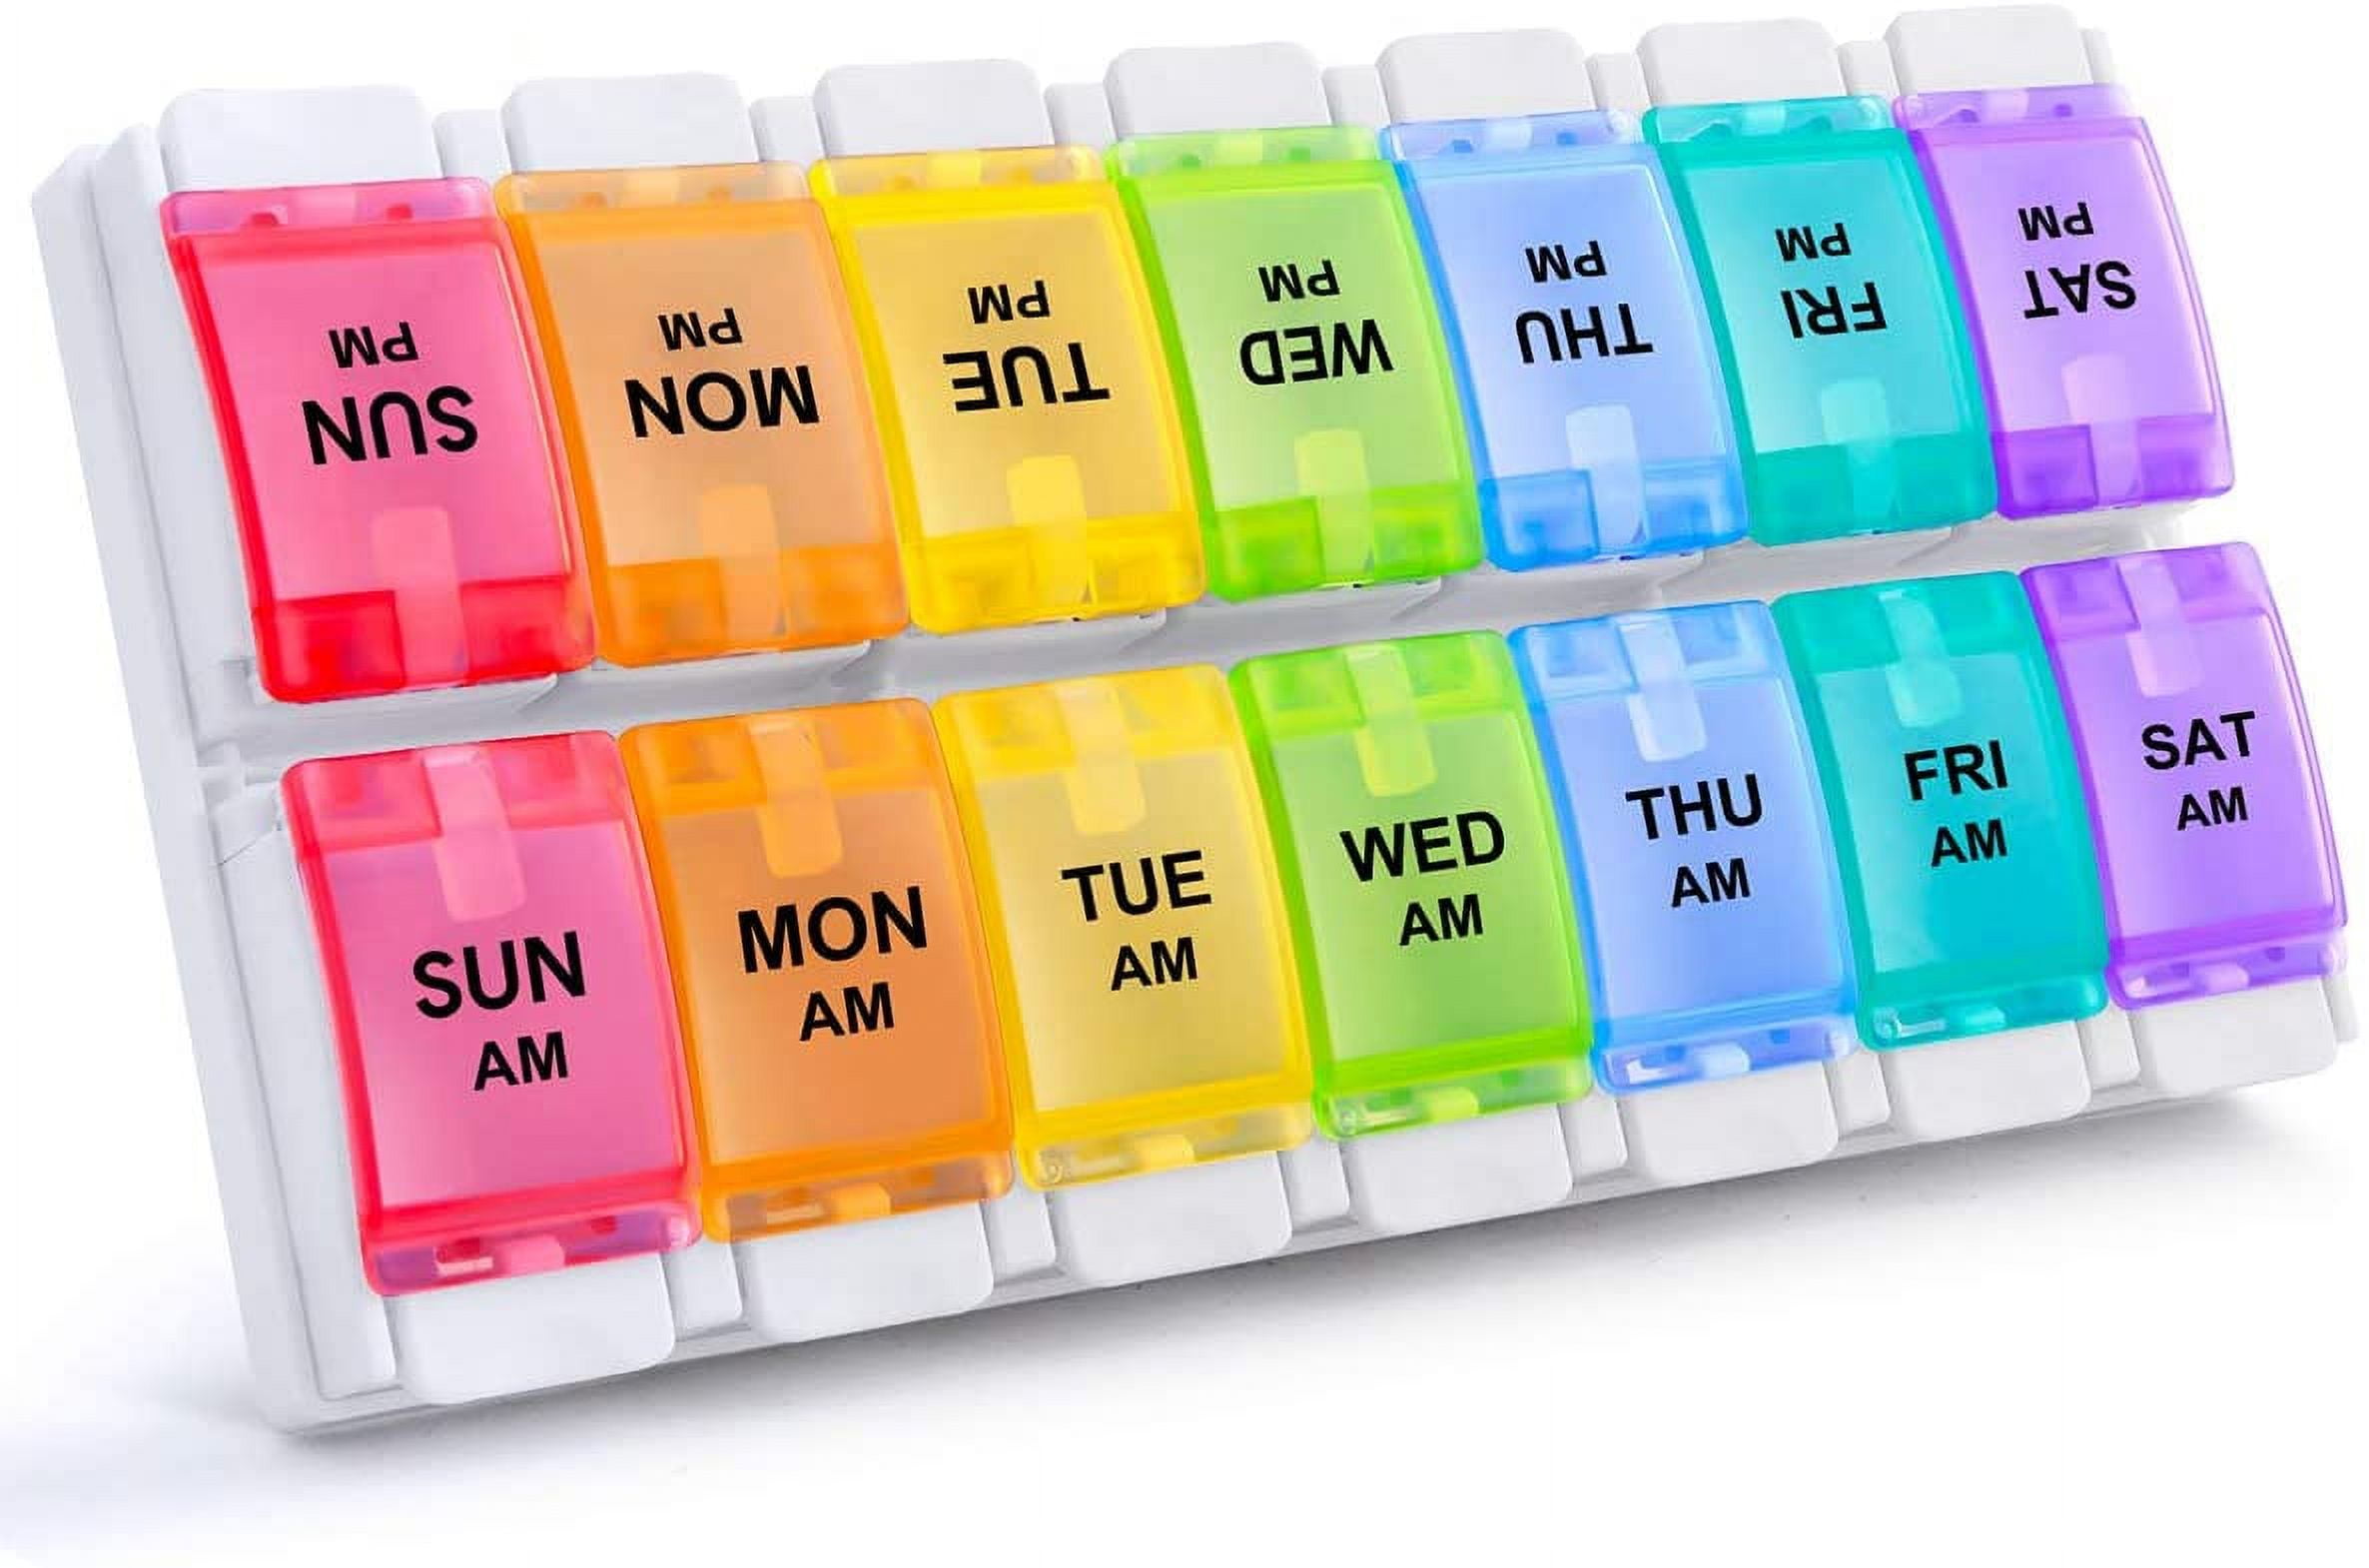 5 Times a Day x 7 Day<br>Large Pill Organizer